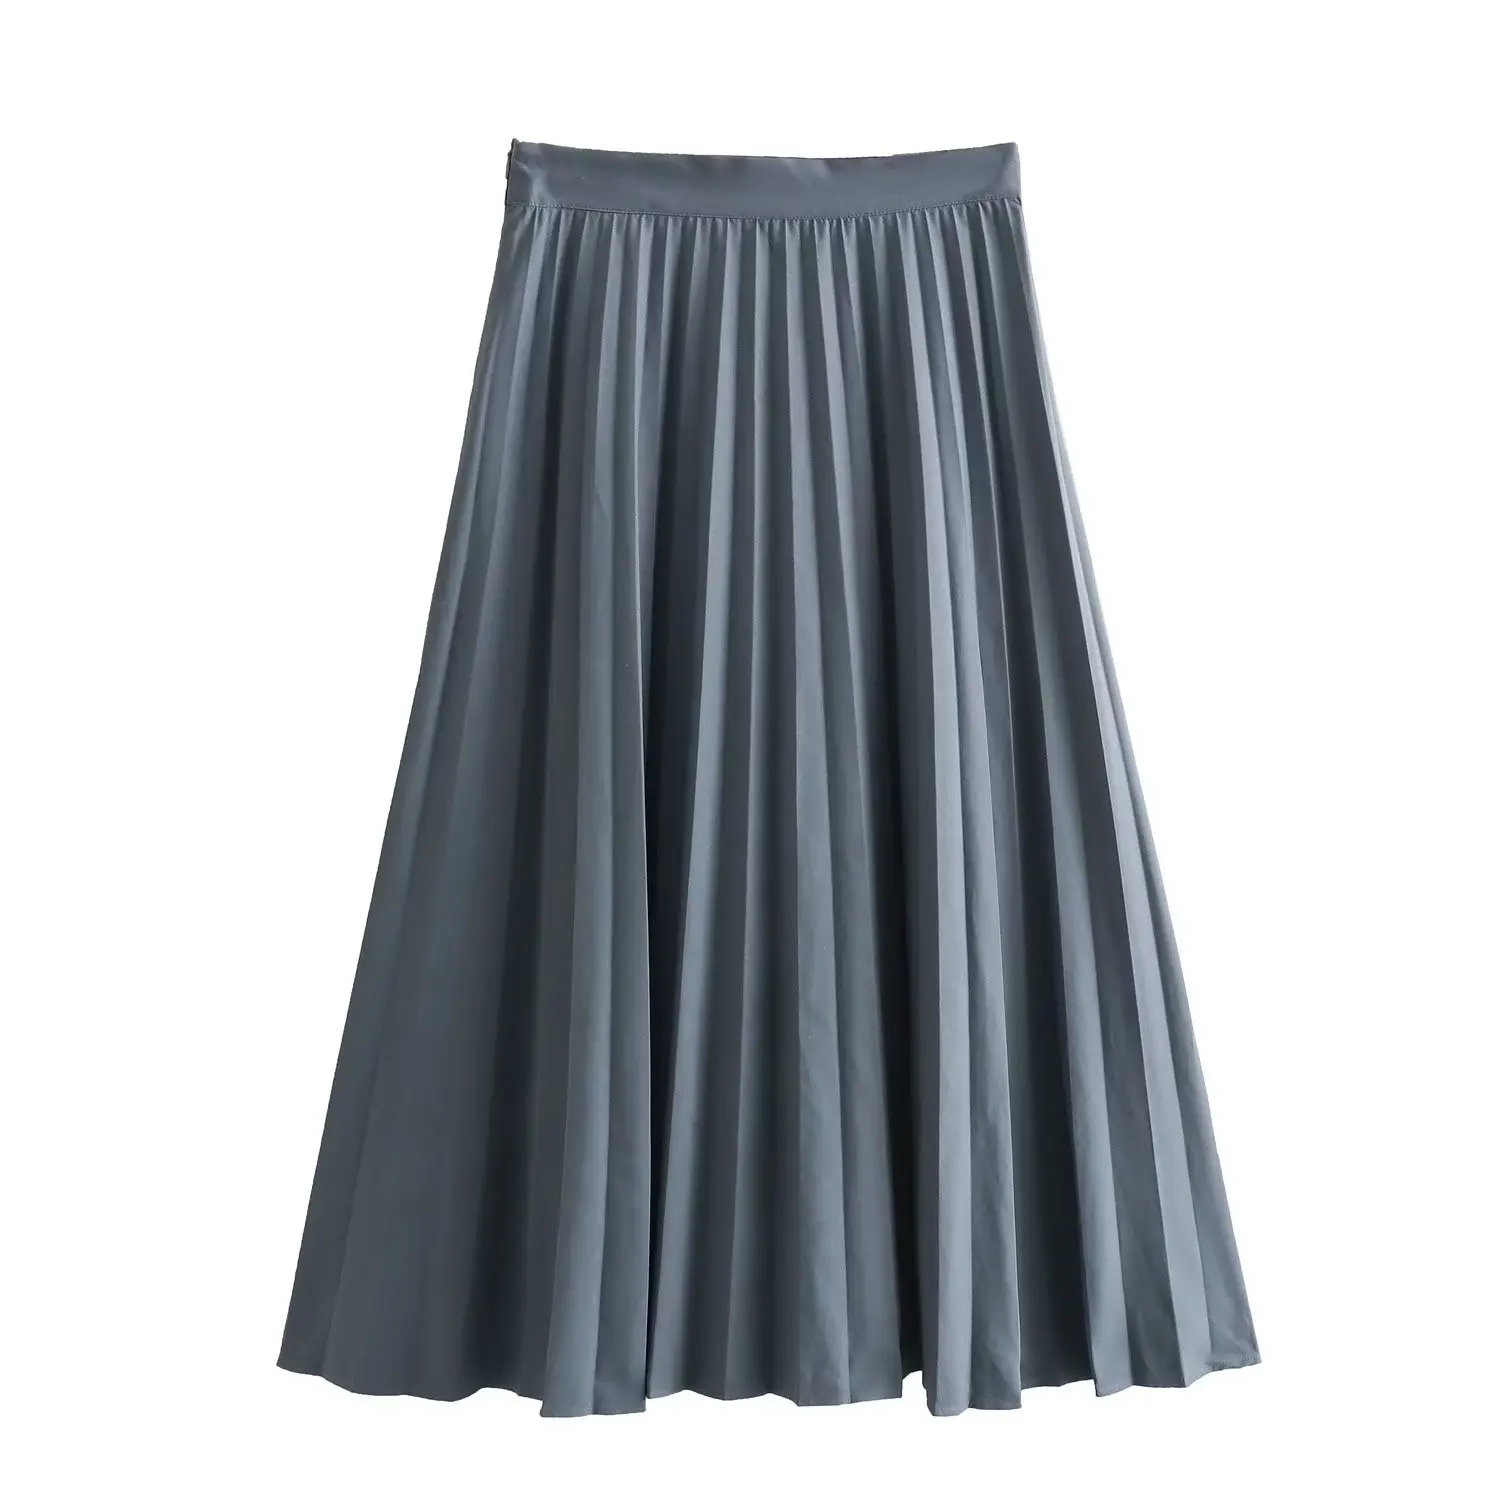 Withered Fashion Simple New British Blue Pleated Skirt High Waist A-line Midi Skirt Women